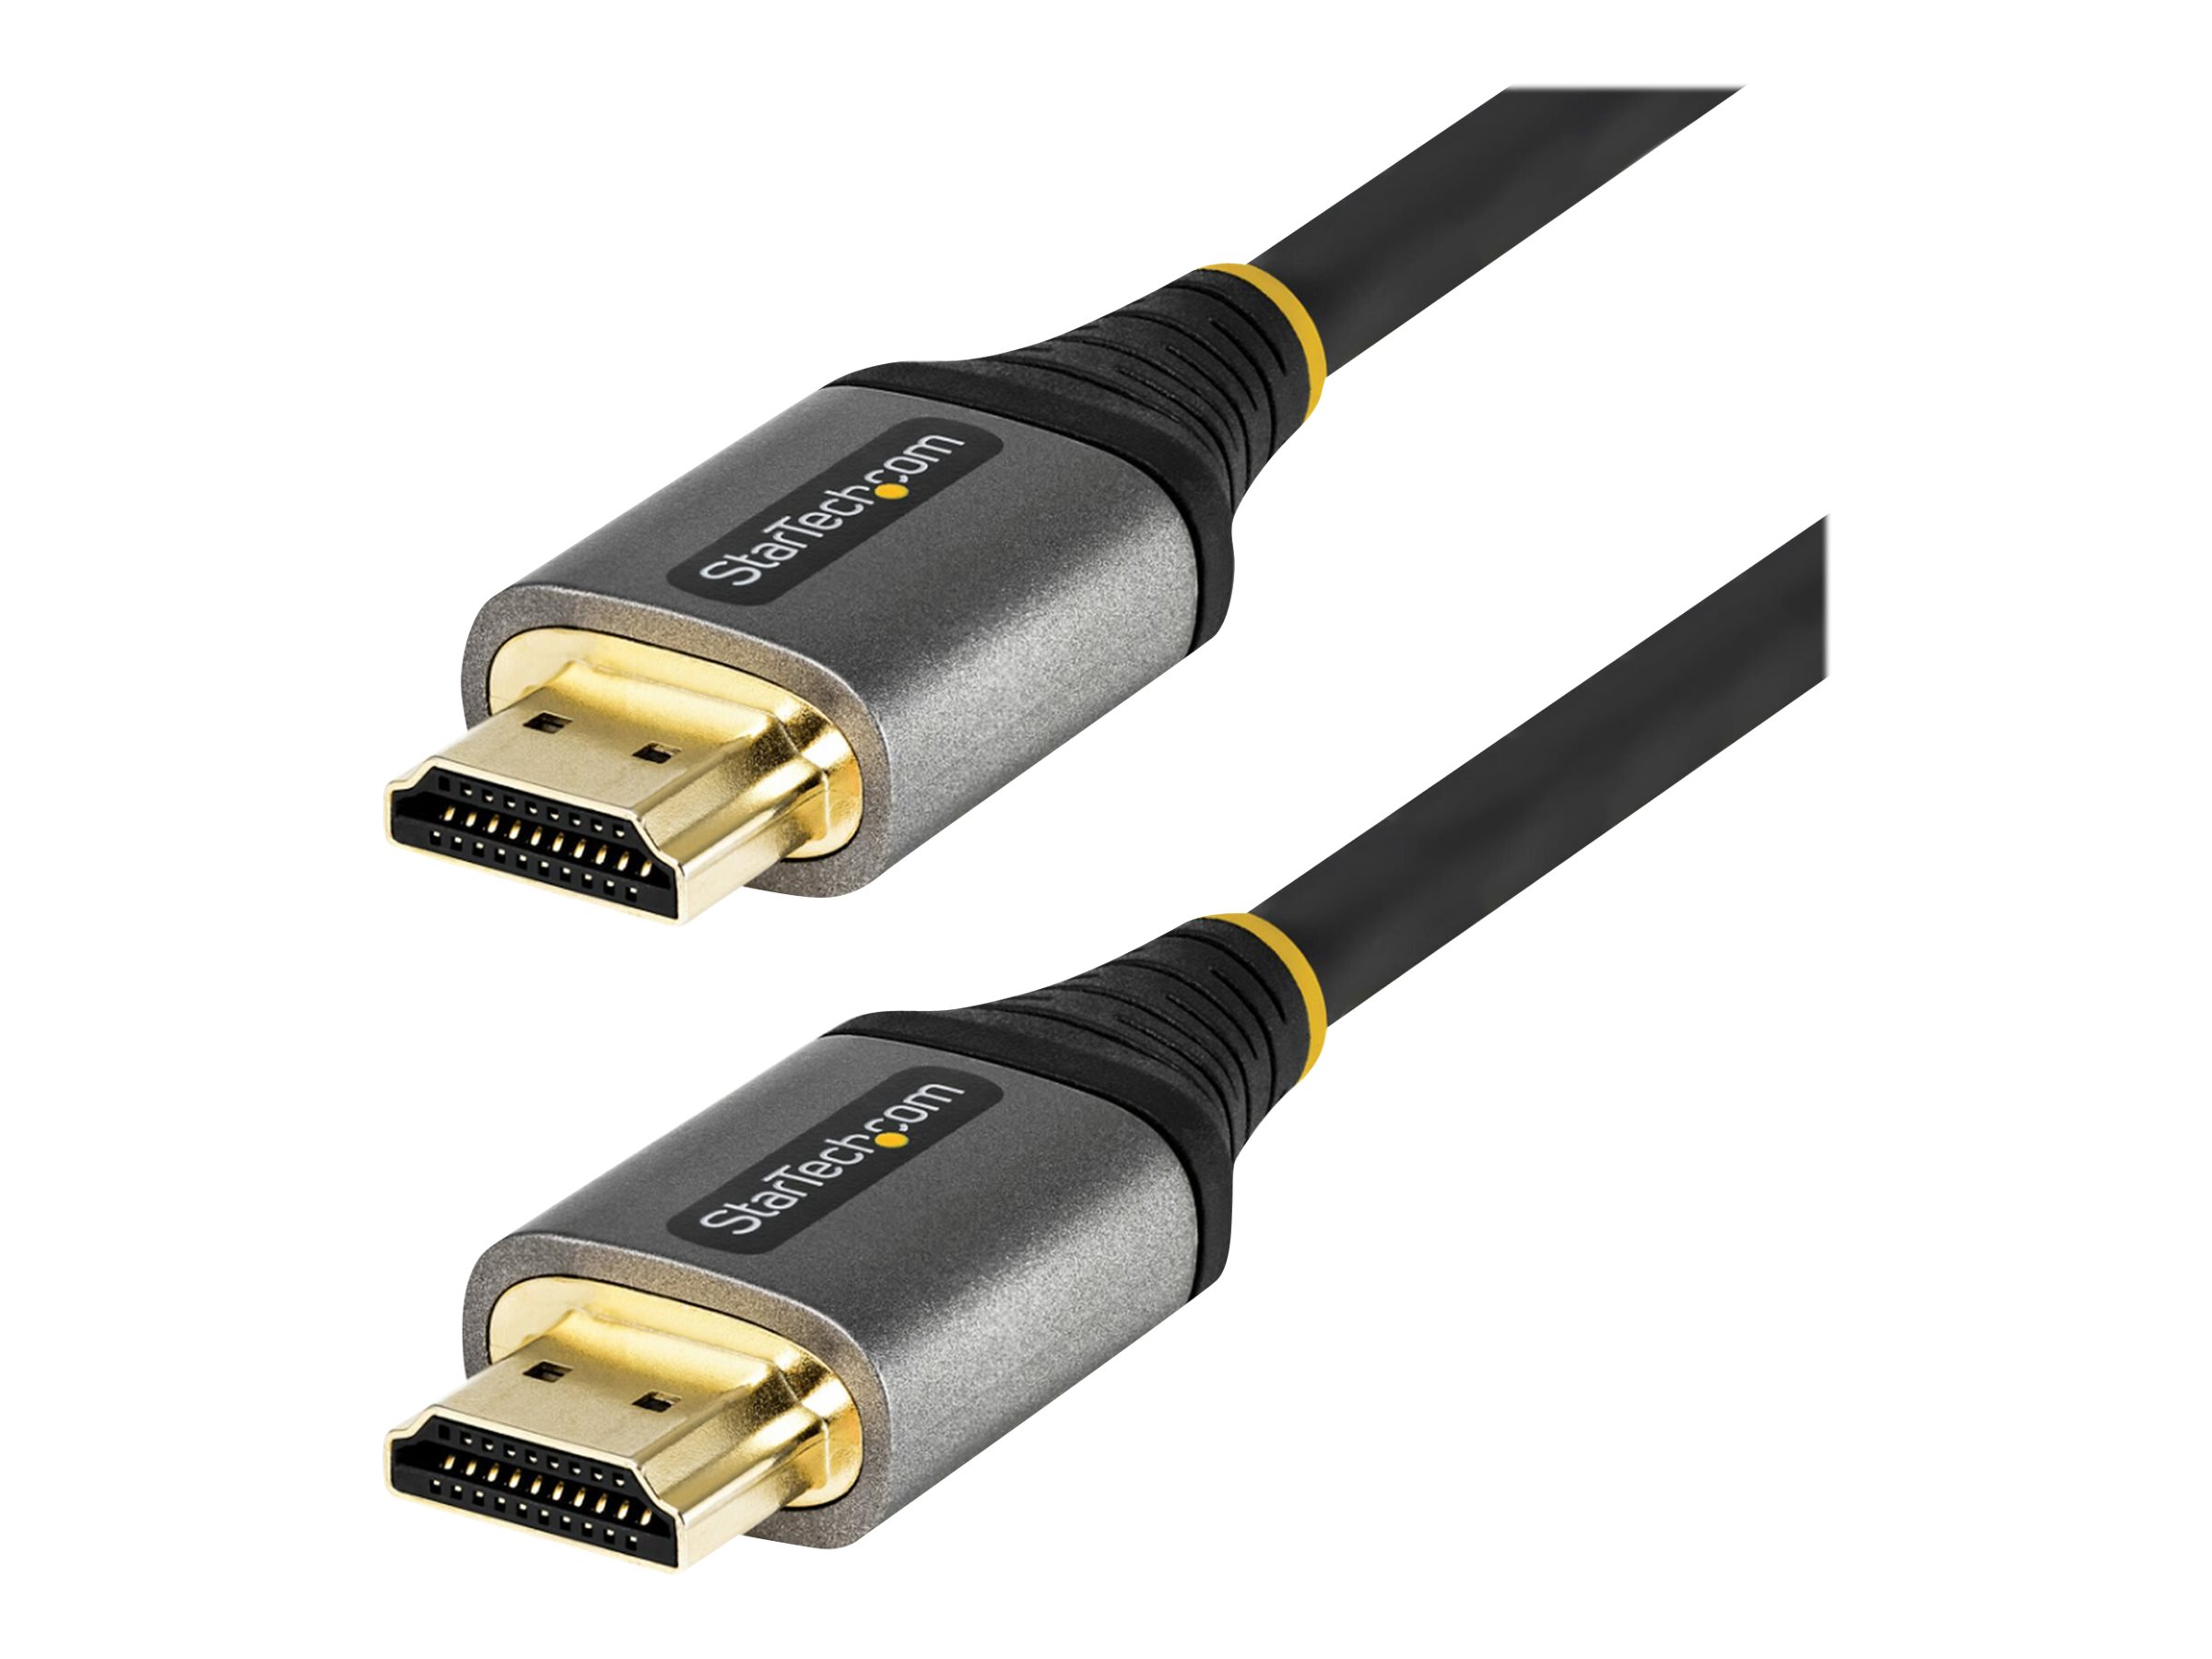 StarTech.com 20in (0.5m) Premium Certified HDMI 2.0 Cable with Ethernet, High-Speed Ultra HD 4K 60Hz HDMI Cable HDR10, ARC, HDMI Cord For Ultra HD Monitors, TVs, Displays, w/ TPE Jacket - Durable HDMI Video Cable (HDMMV50CM)